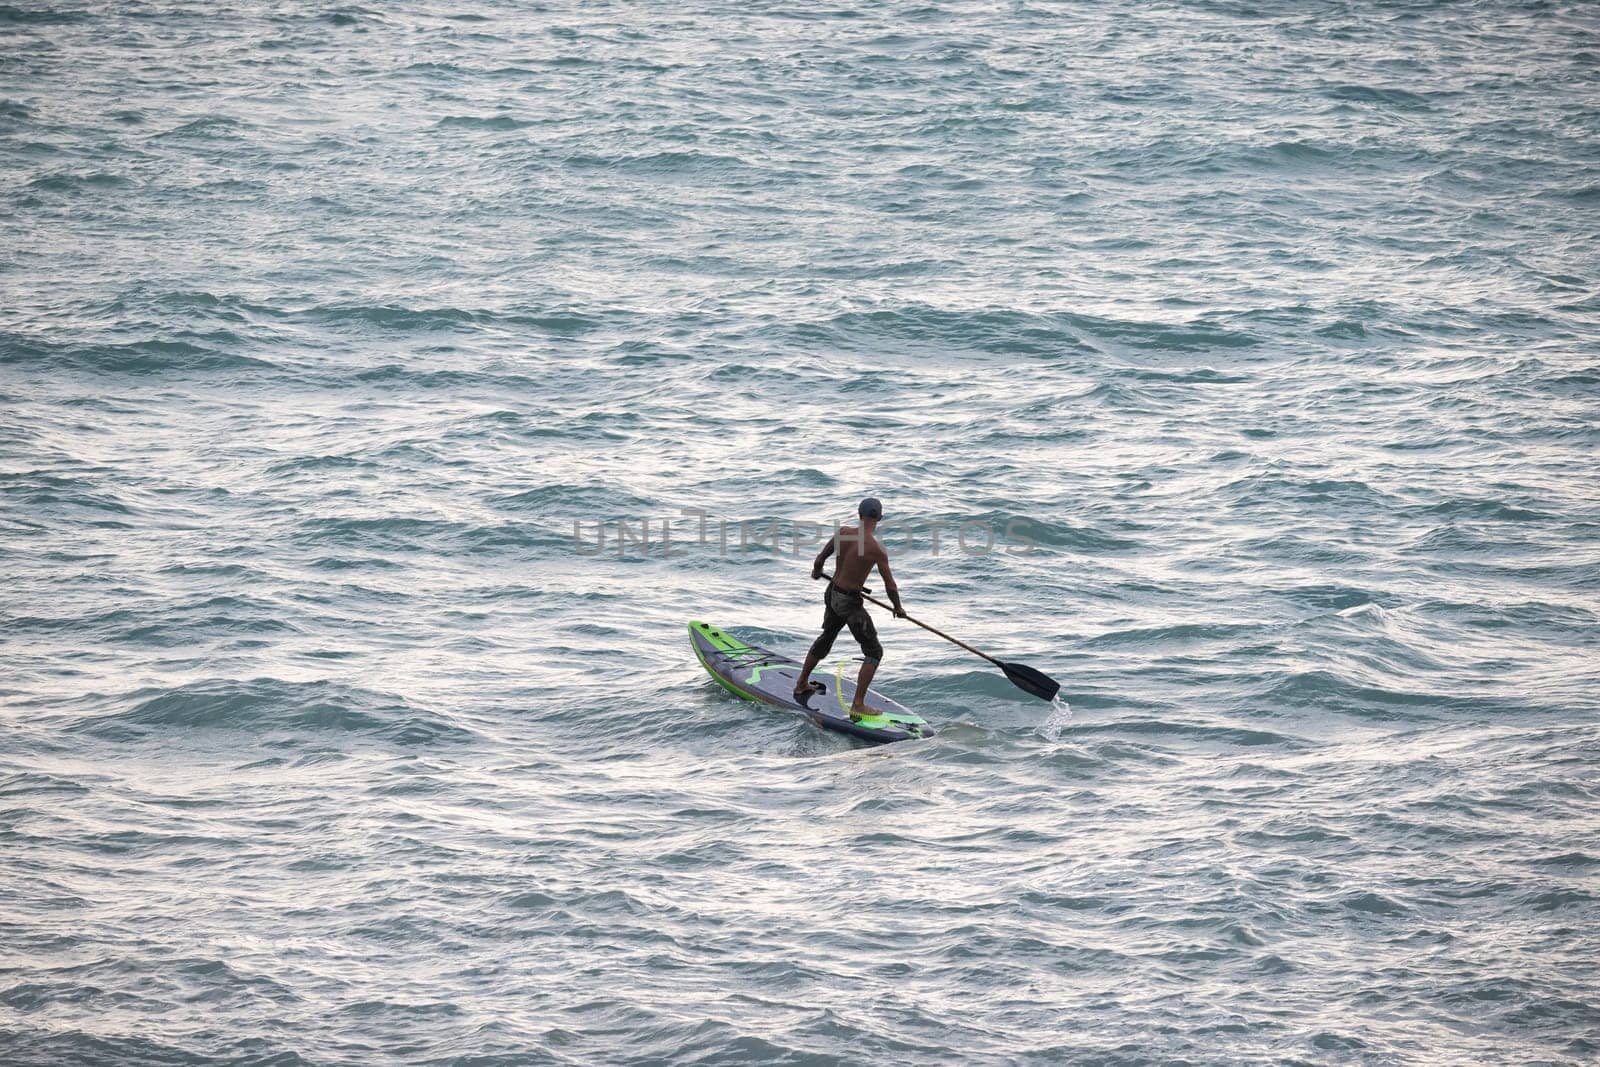 athletic wiry surfer guy swims with a paddle on sup board in the sea Stand up paddleboarding